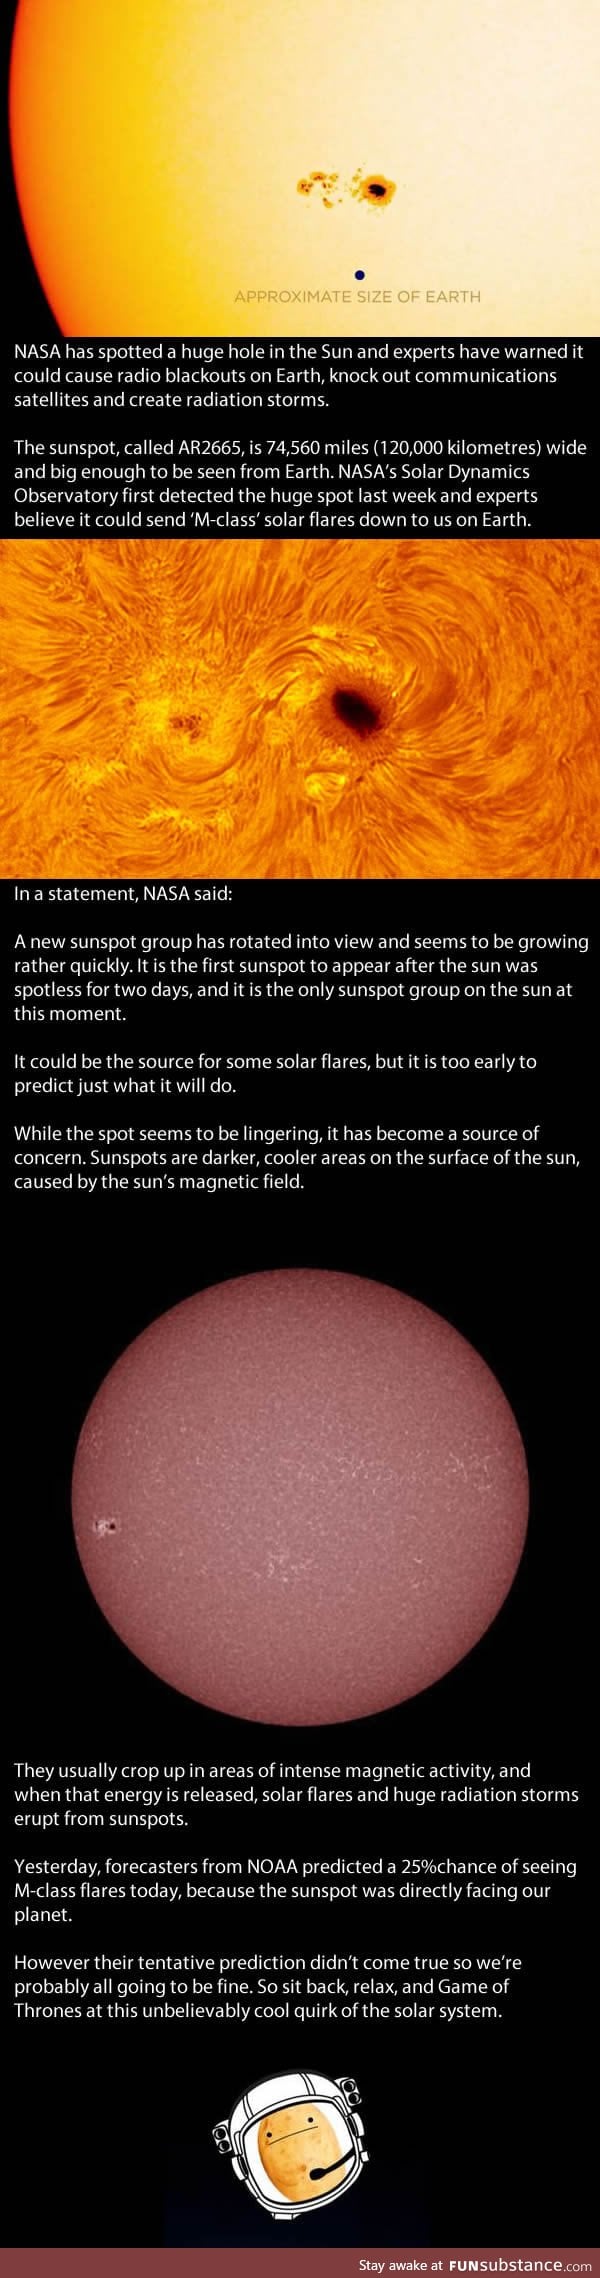 NASA Concerned by 75,000 mile wide hole appearing on the sun